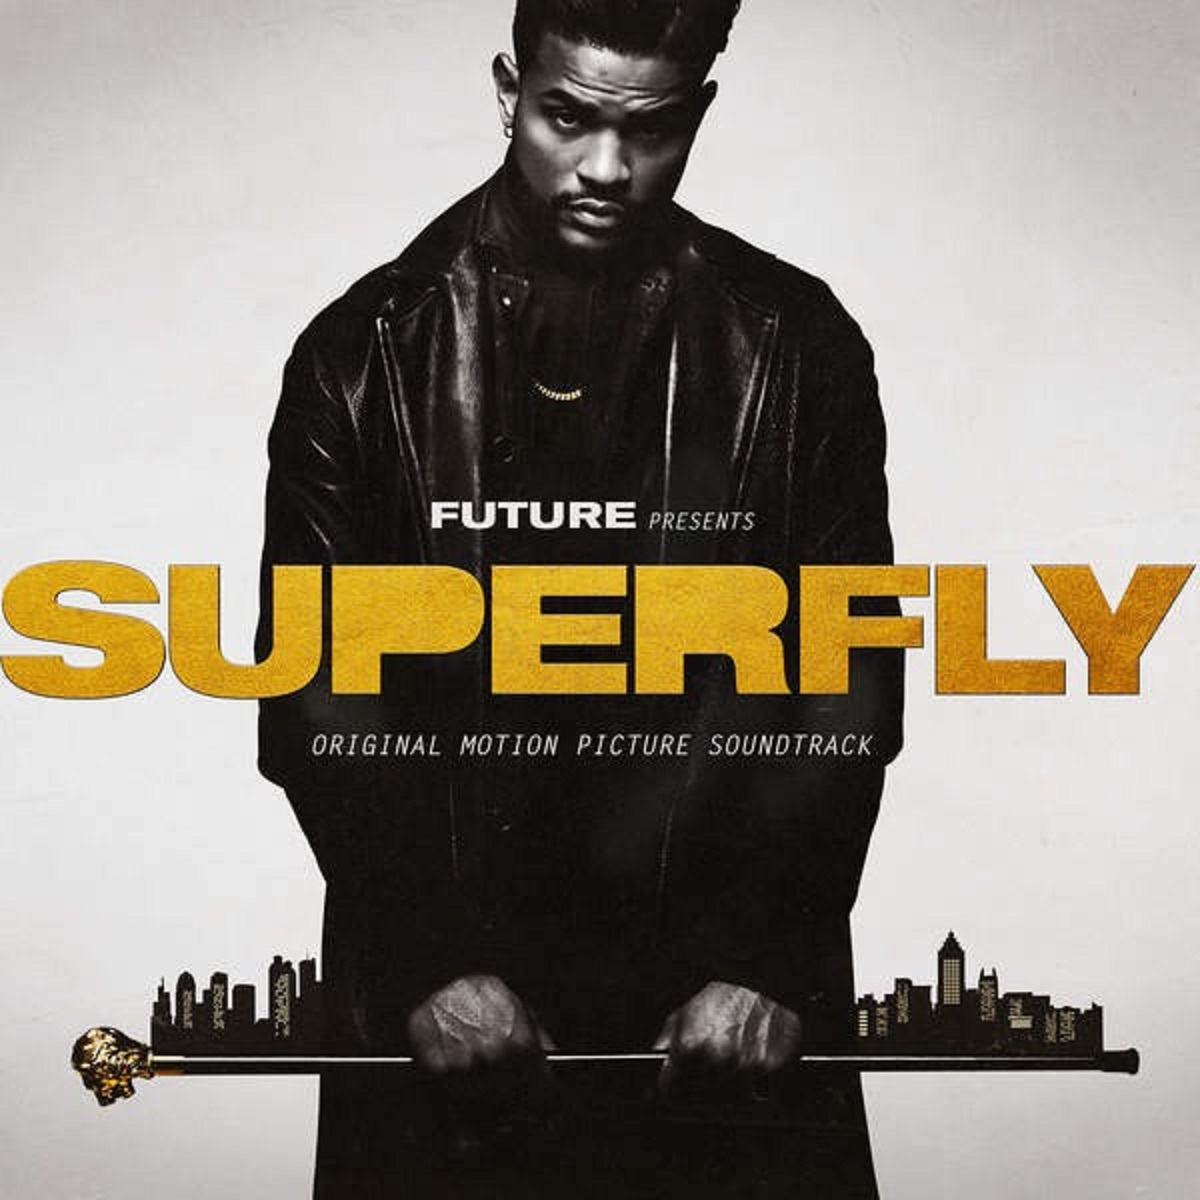 Bag-feat.-Yung-Bans-From-the-Original-Motion-Picture-Soundtrack-_SUPERFLY_-Single.jpg